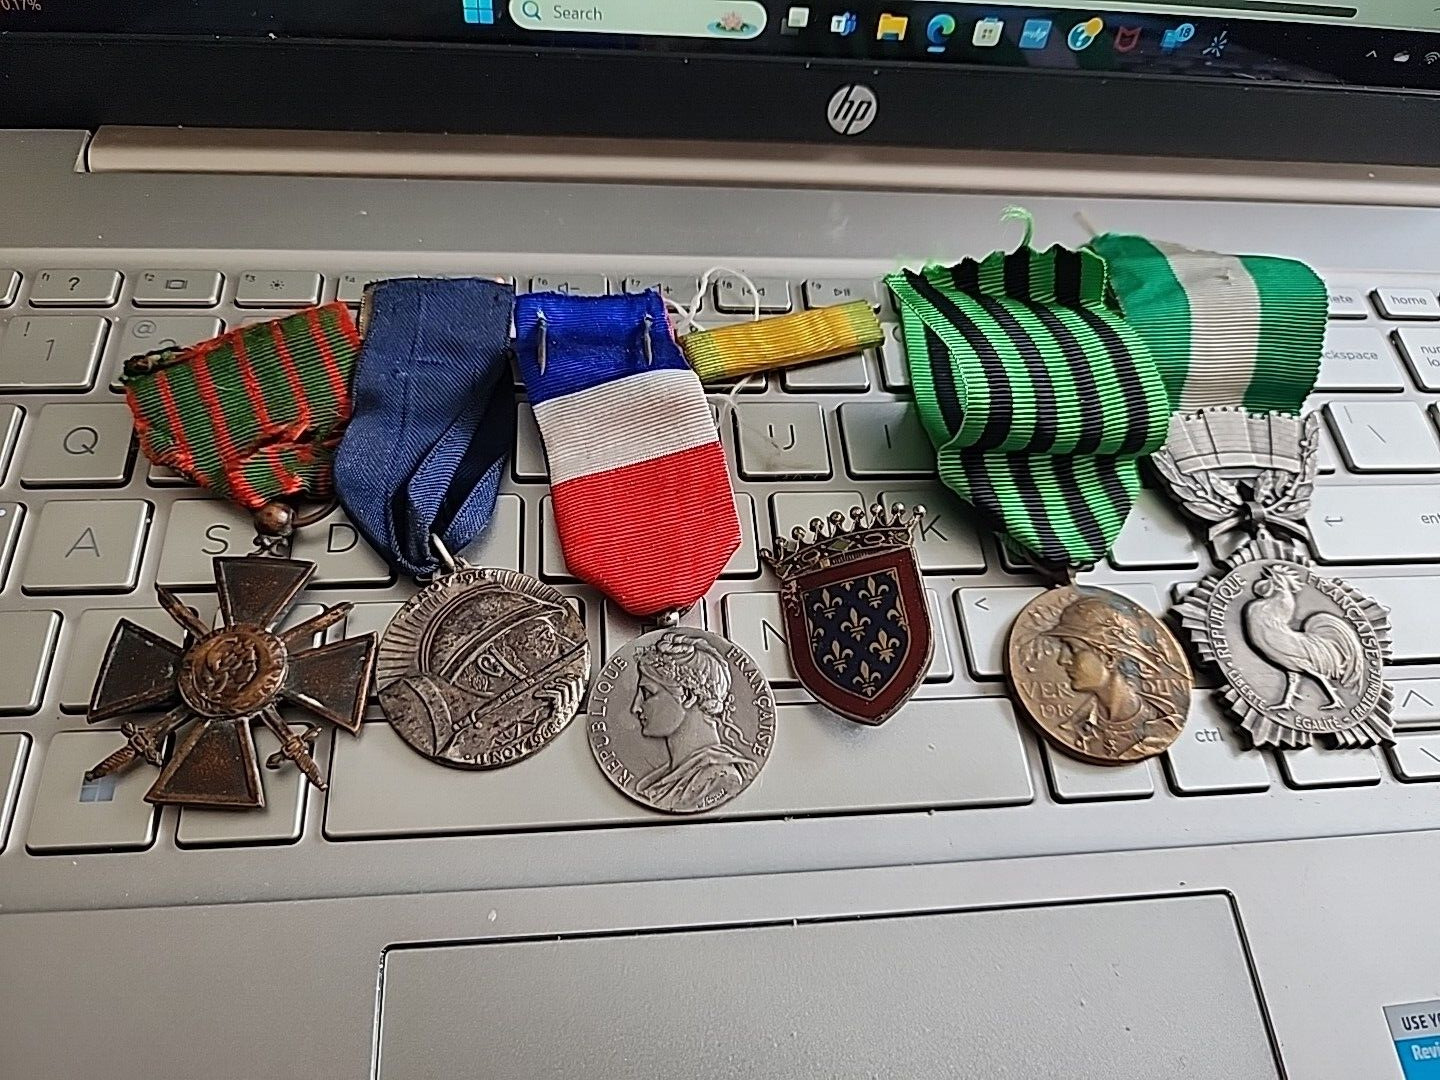 Mix of French Medals Ribbons Badges - DEALER SALE - SEE STORE HUGE SALE